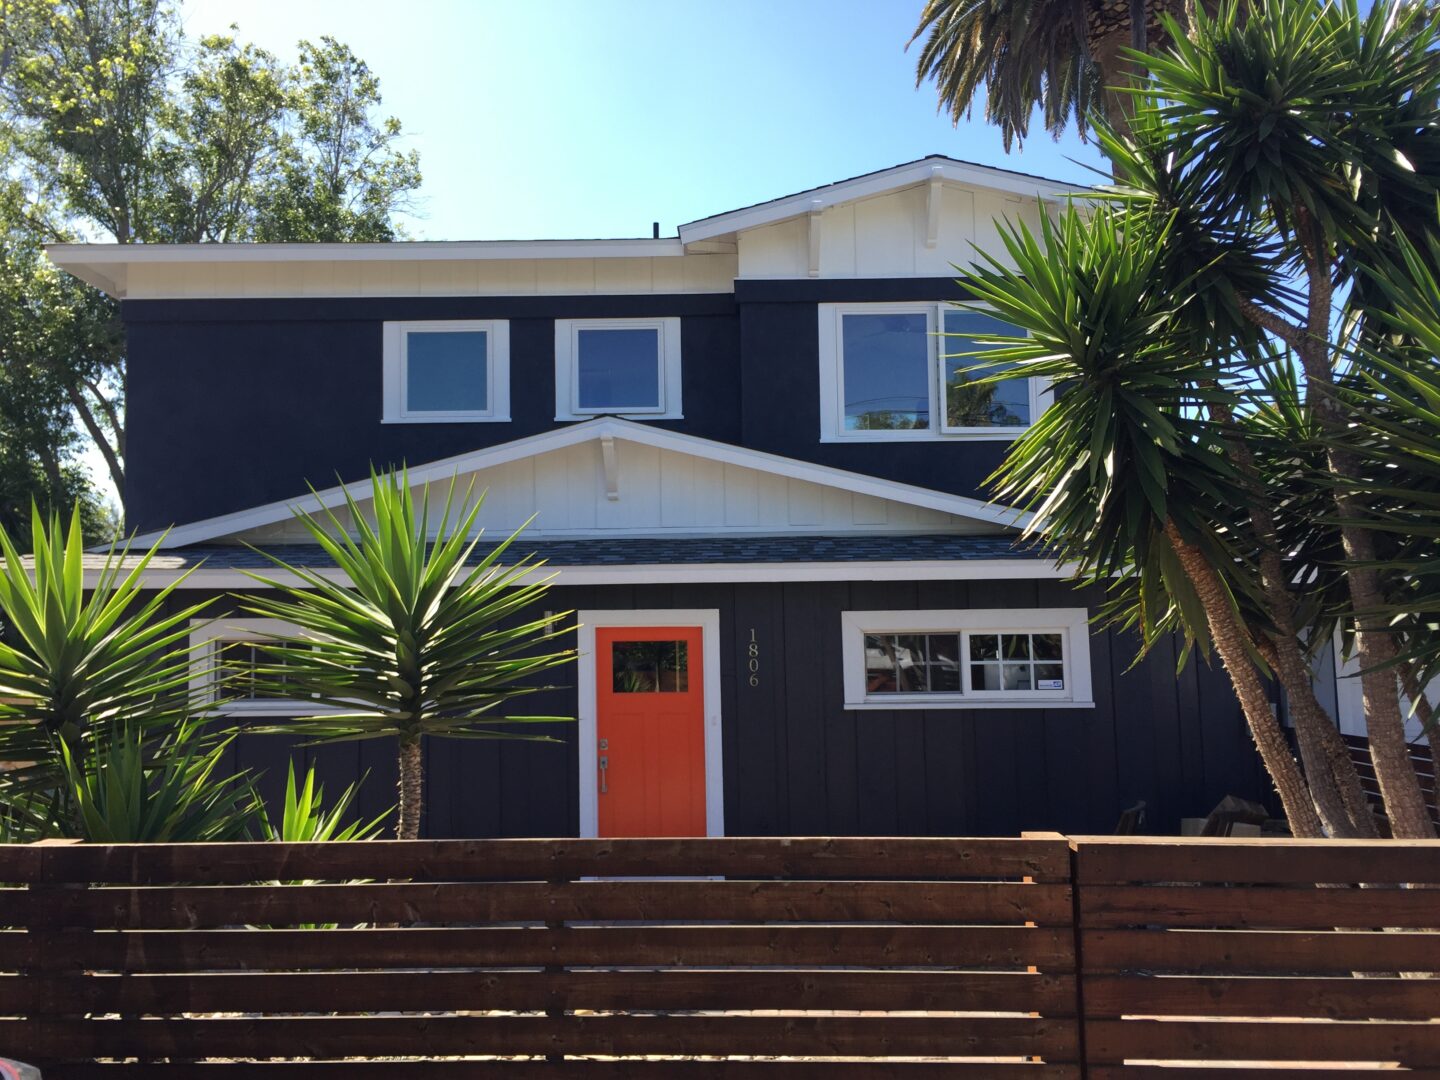 A black house with orange door and white trim.